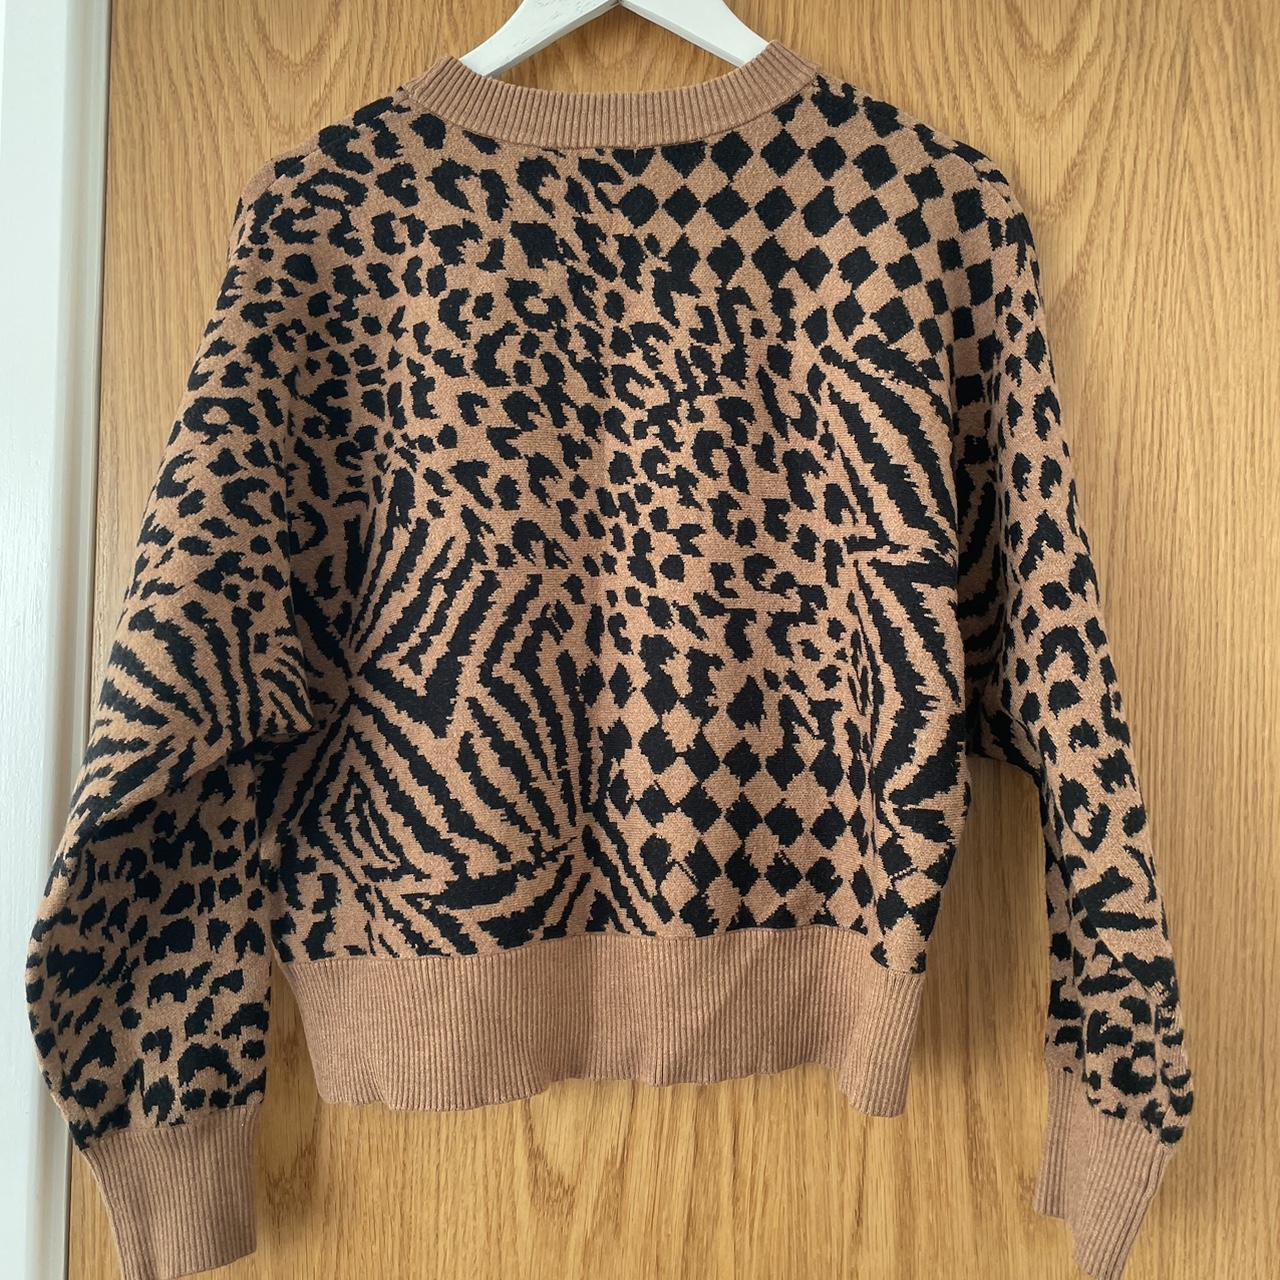 AMUSE SOCIETY Women's Black and Brown Jumper | Depop